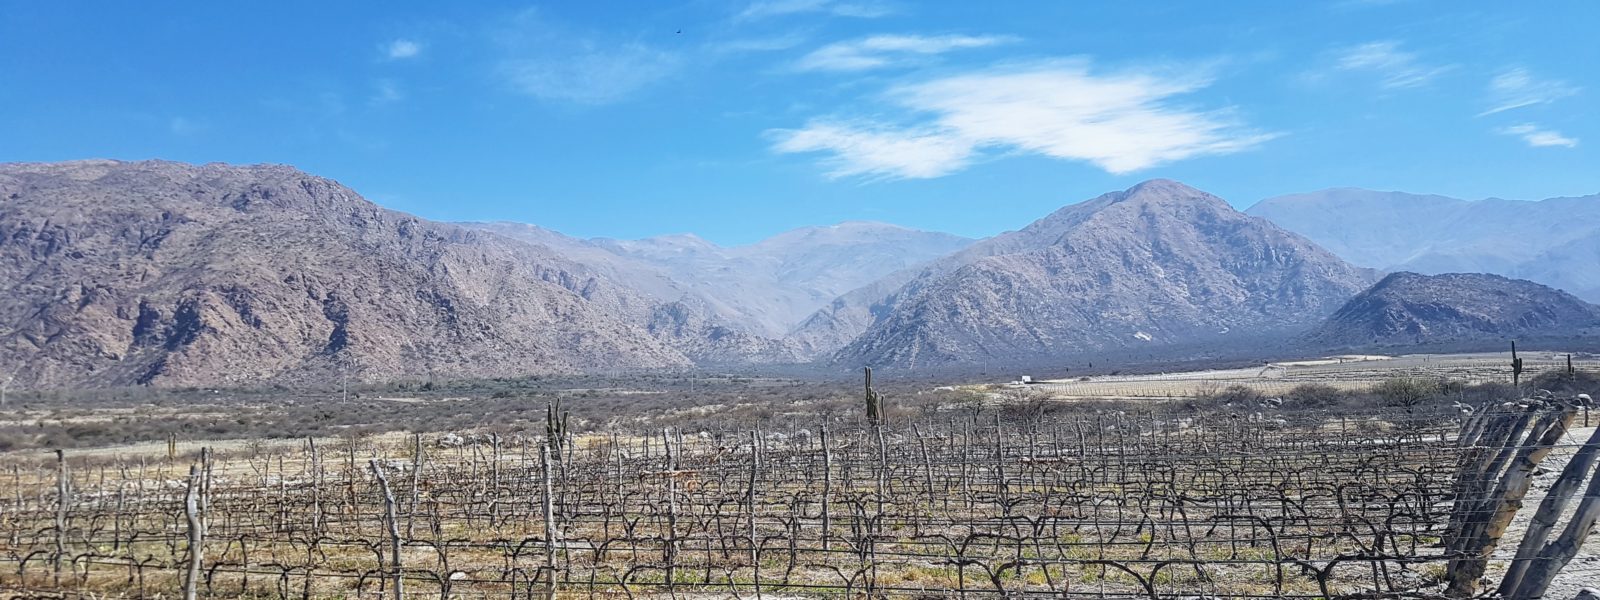 Drinking Argentinian wines in Salta and Cafayate